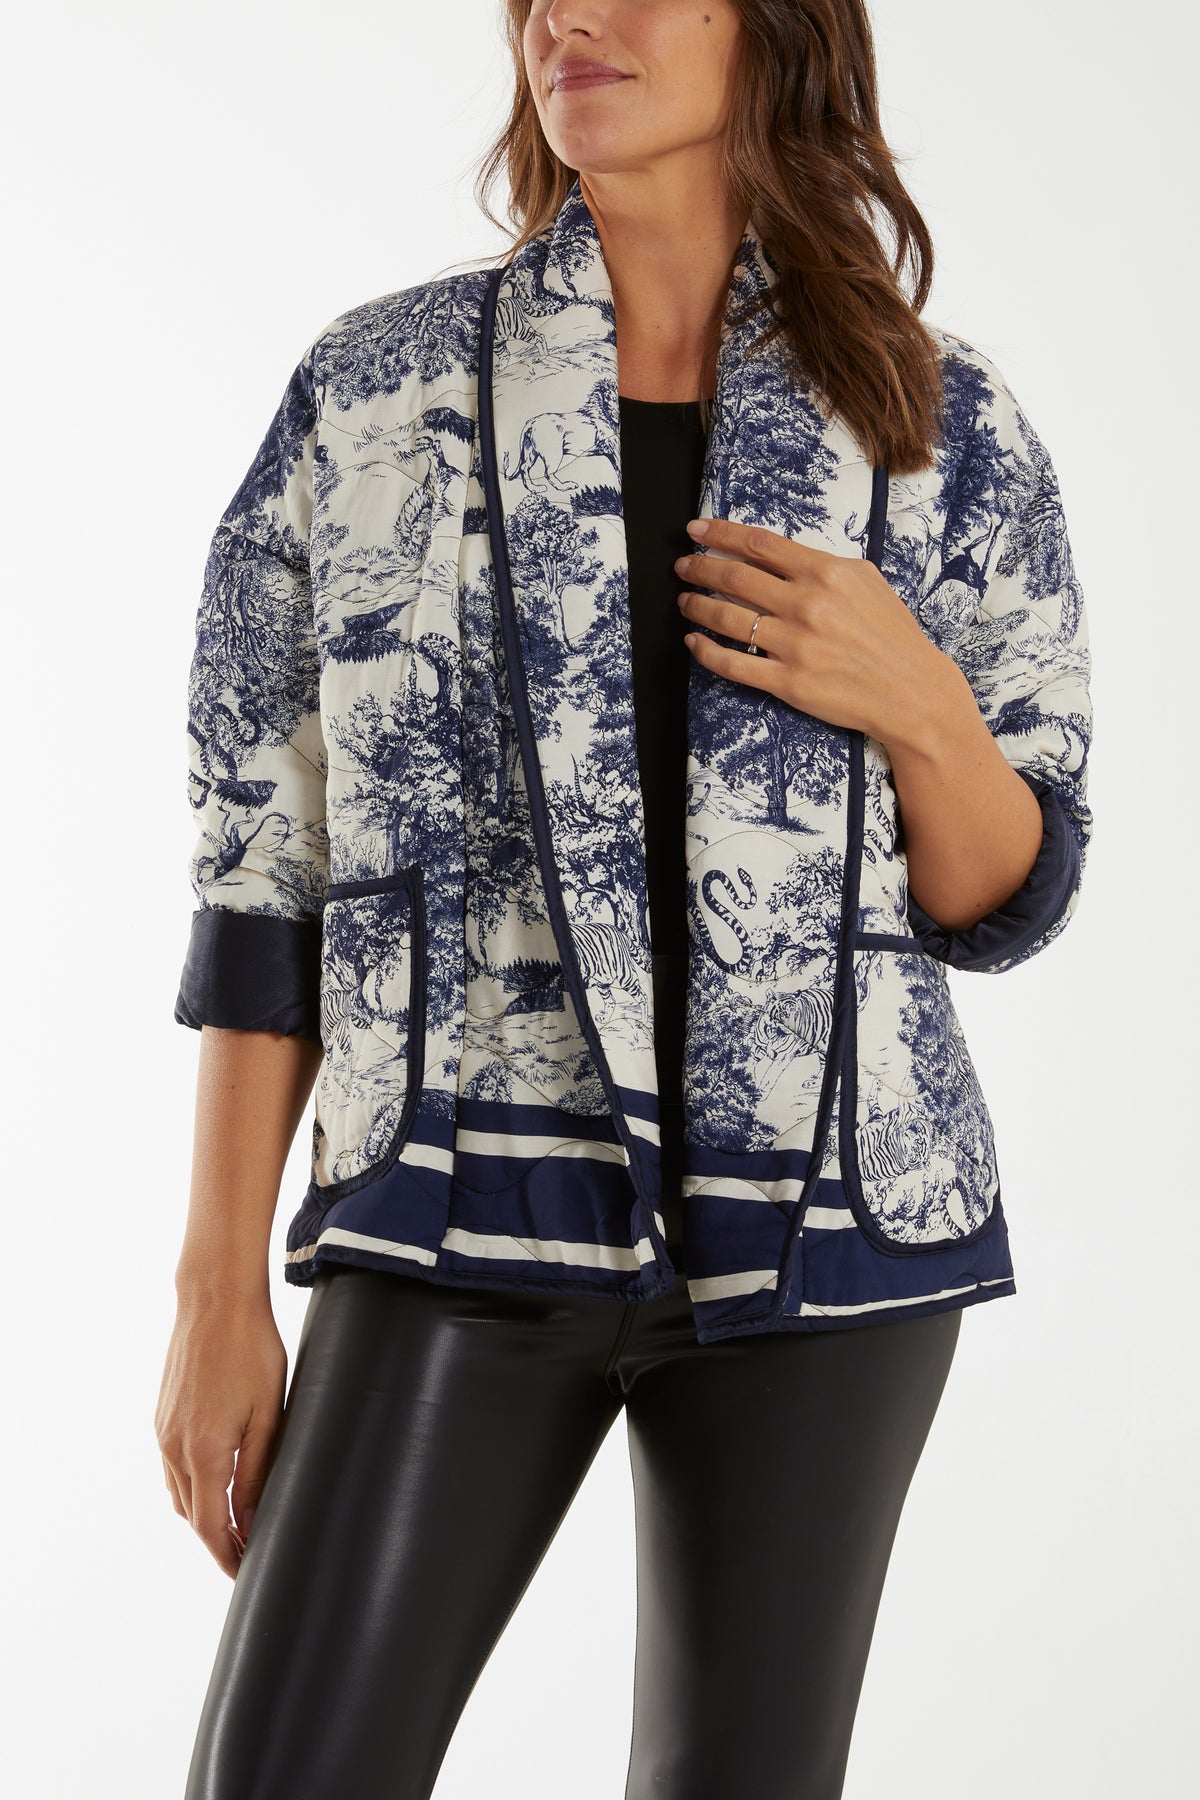 Toile Du Jouy Quilted Jacket